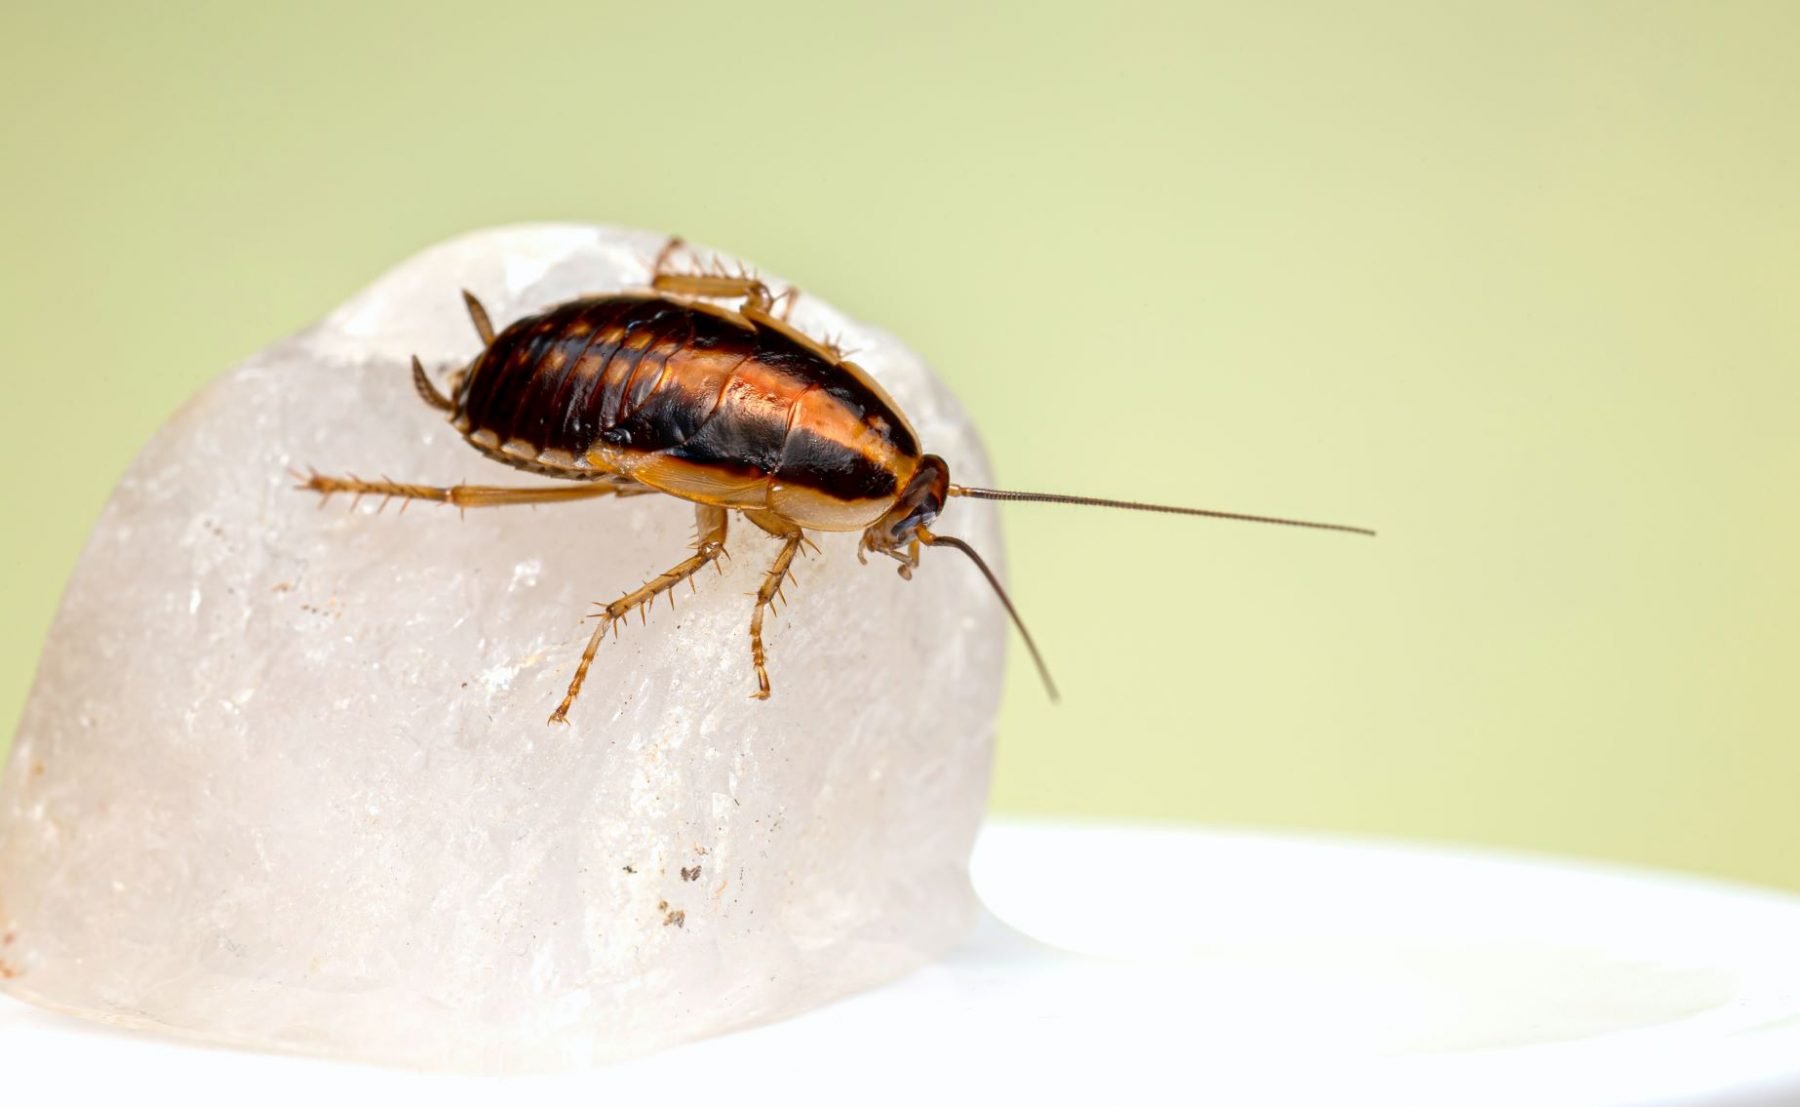 Cockroach on piece of ice